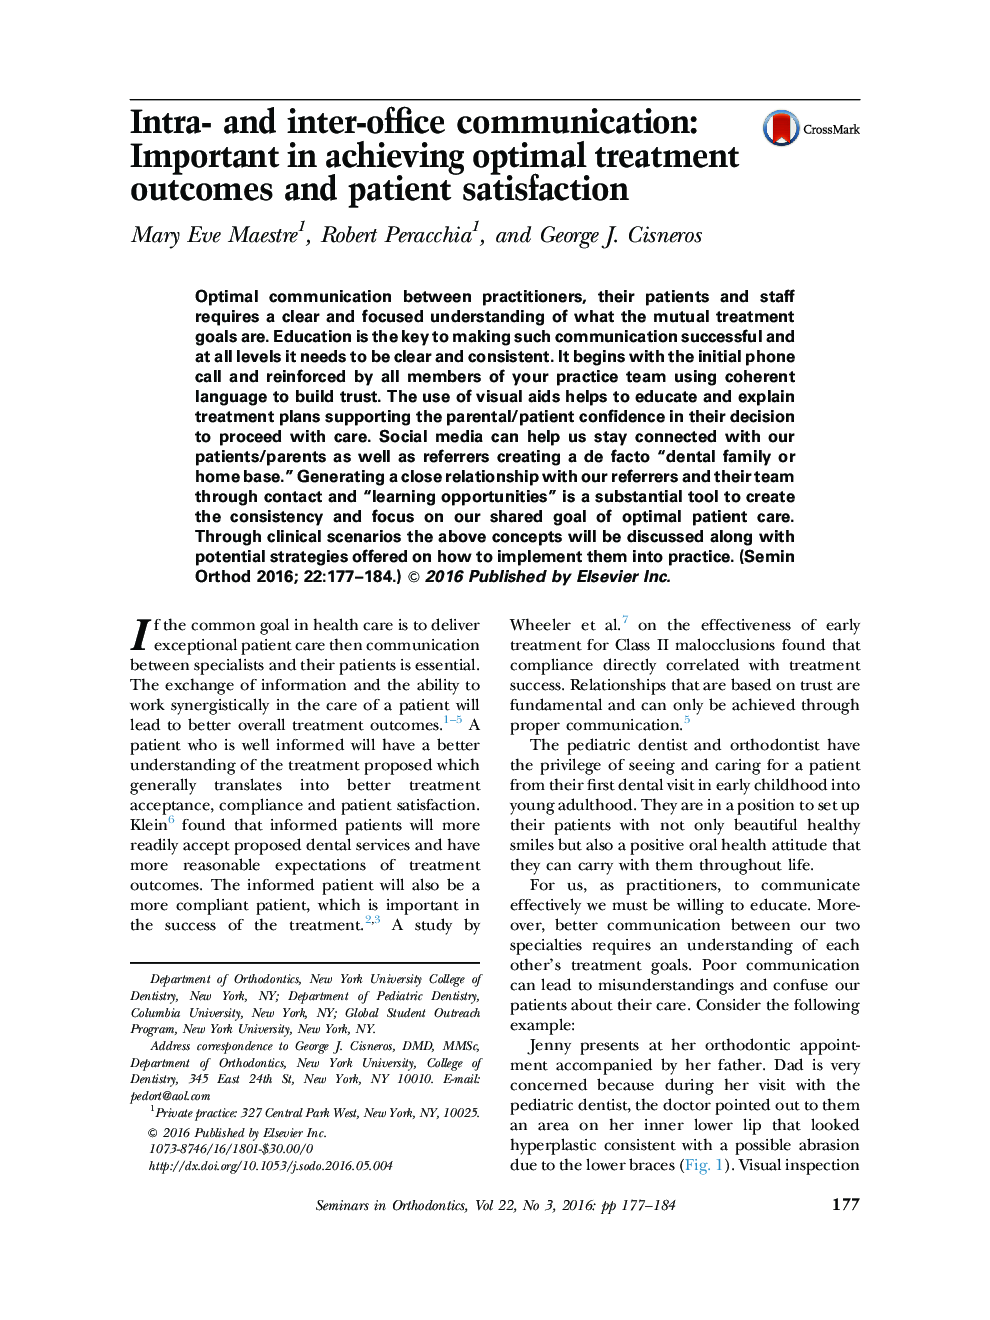 Intra- and inter-office communication: Important in achieving optimal treatment outcomes and patient satisfaction